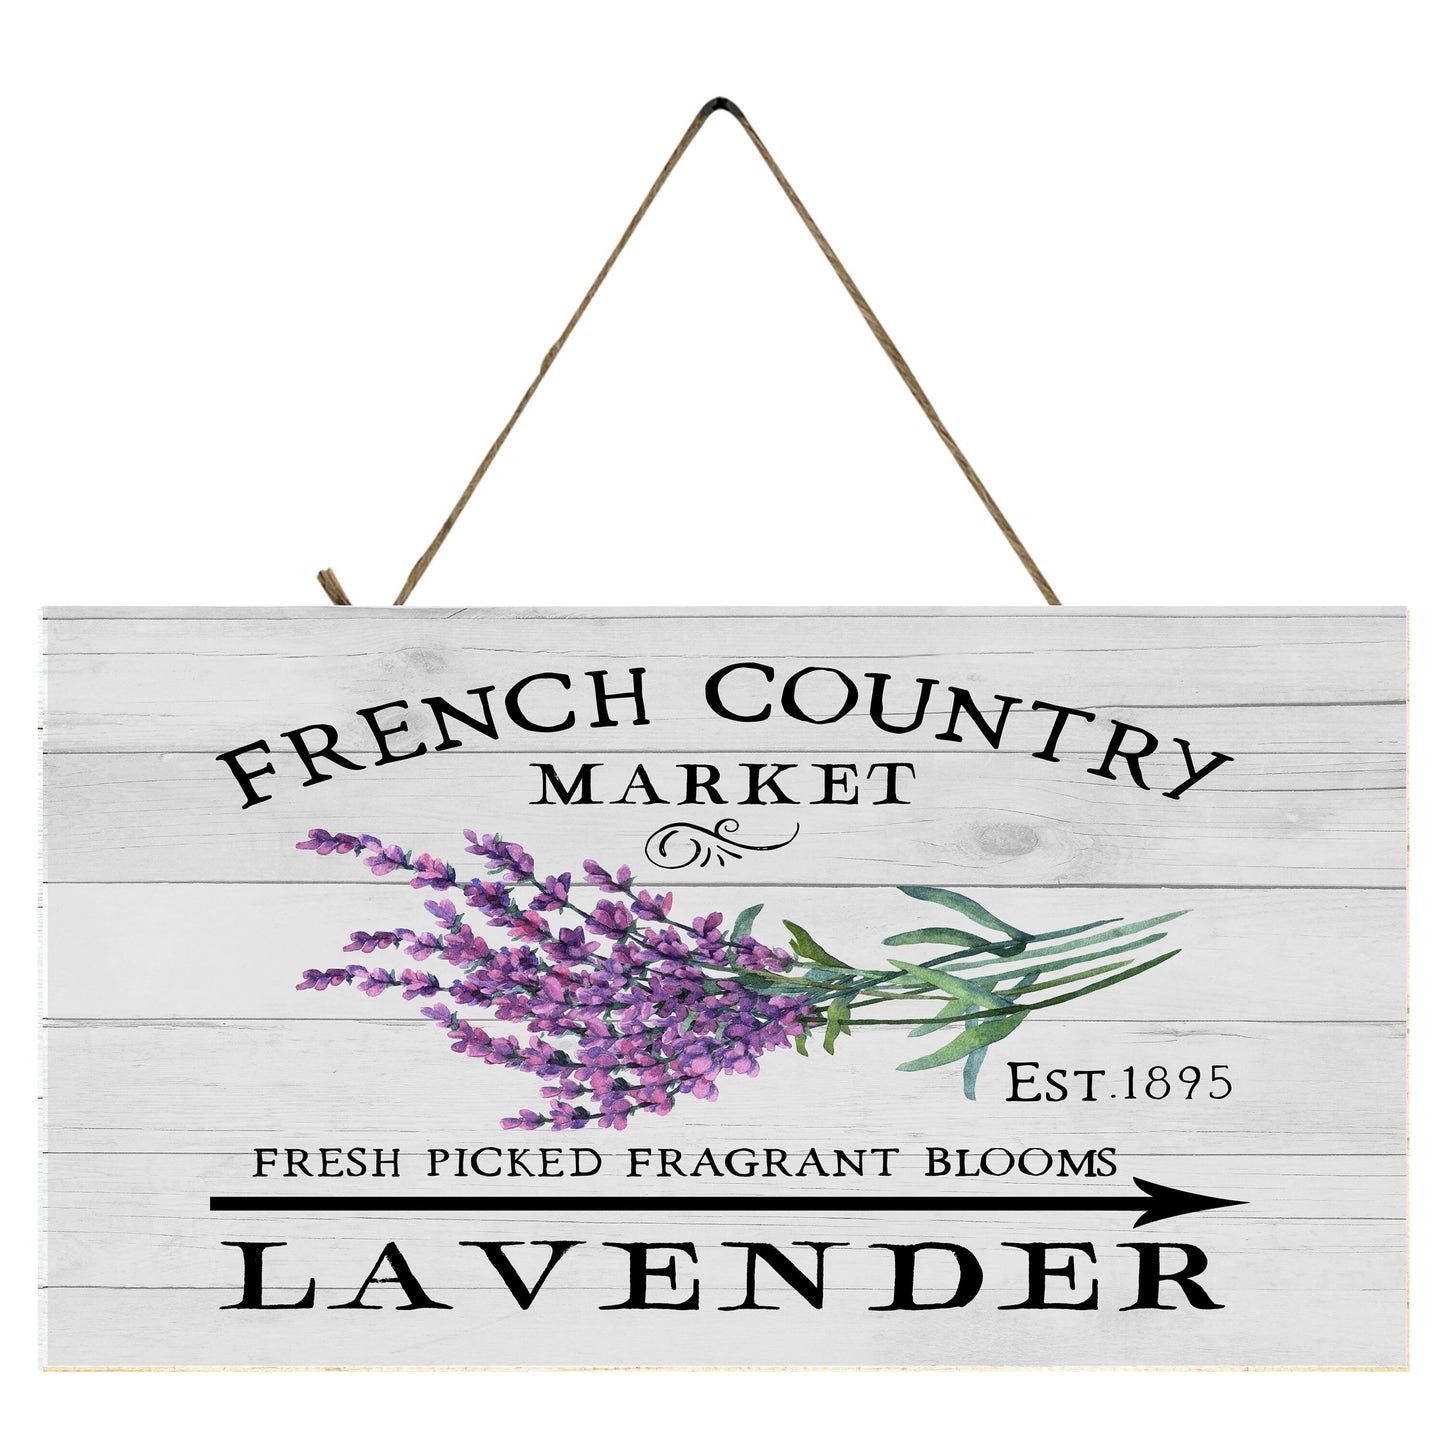 Farmhouse French Country Market Lavender Printed Handmade Wood Sign